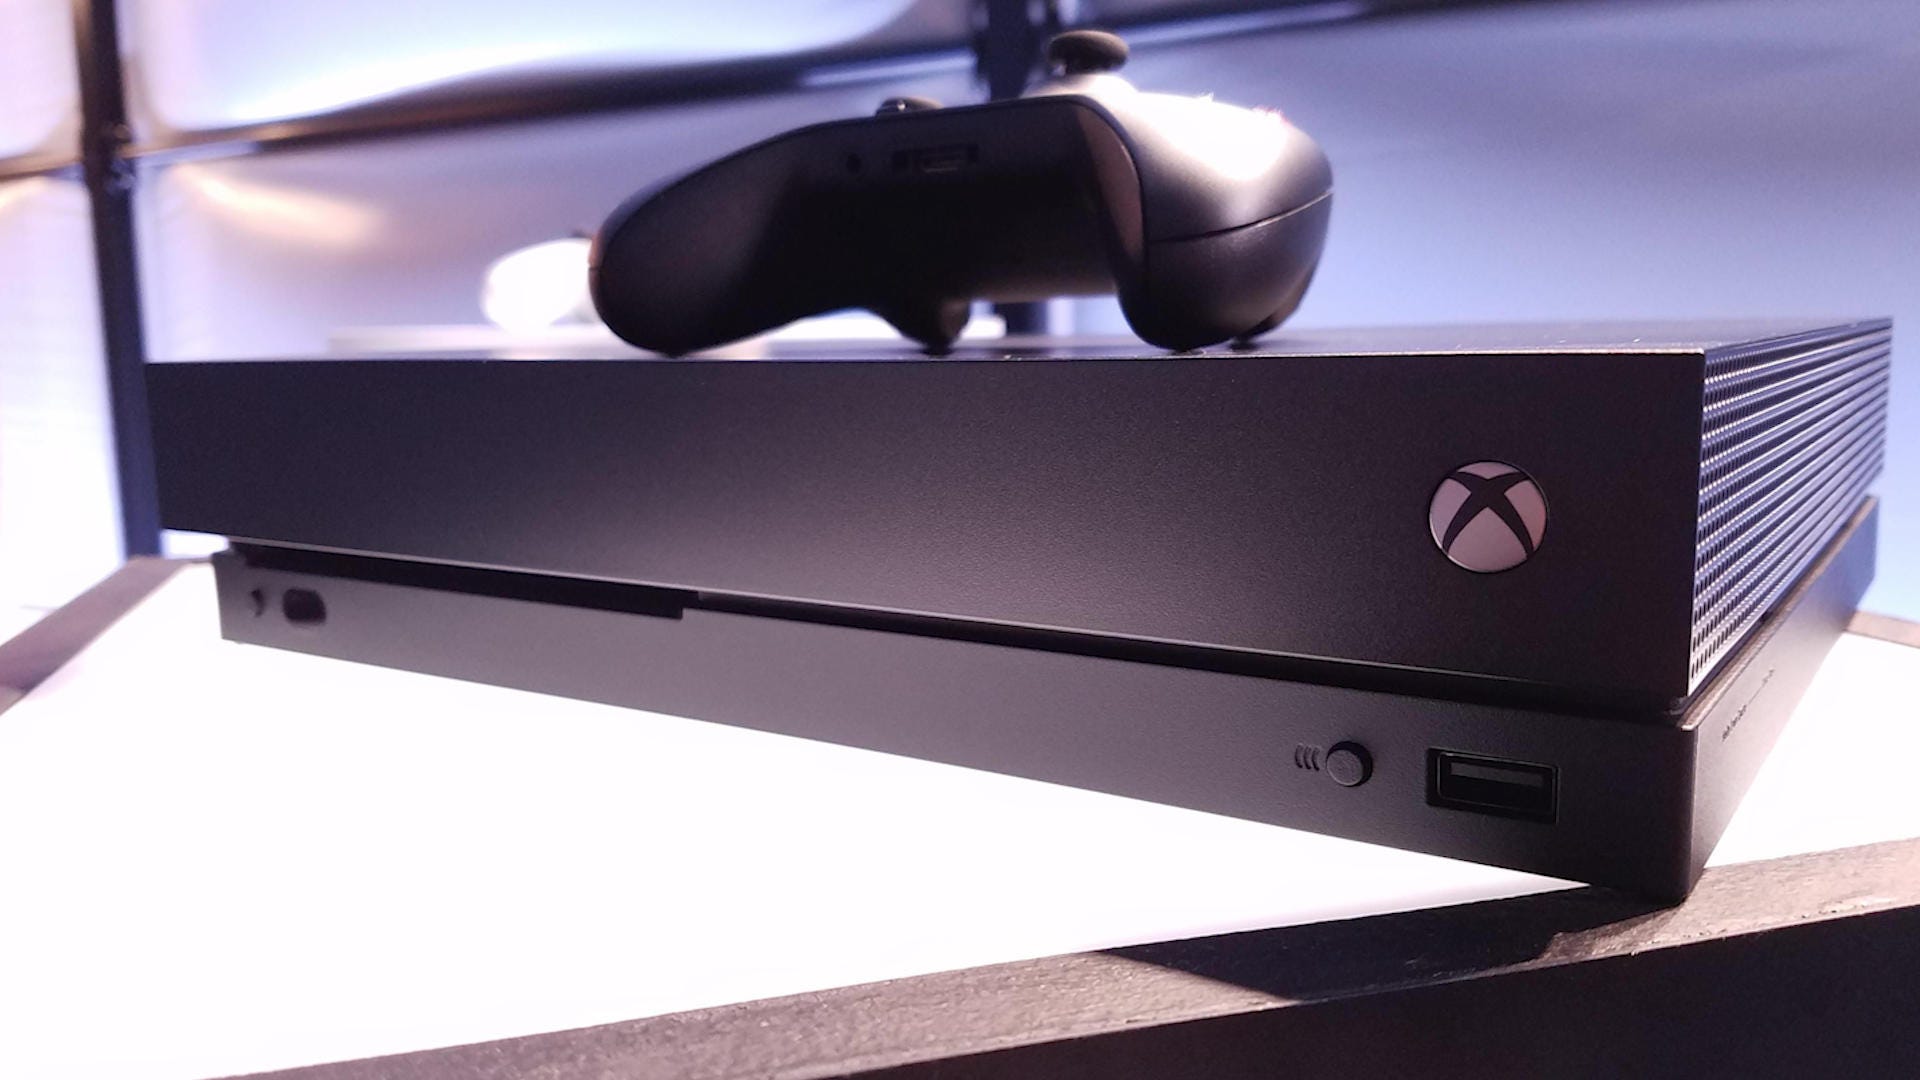 Here's our first up-close encounter with the Xbox One X - Video - CNET